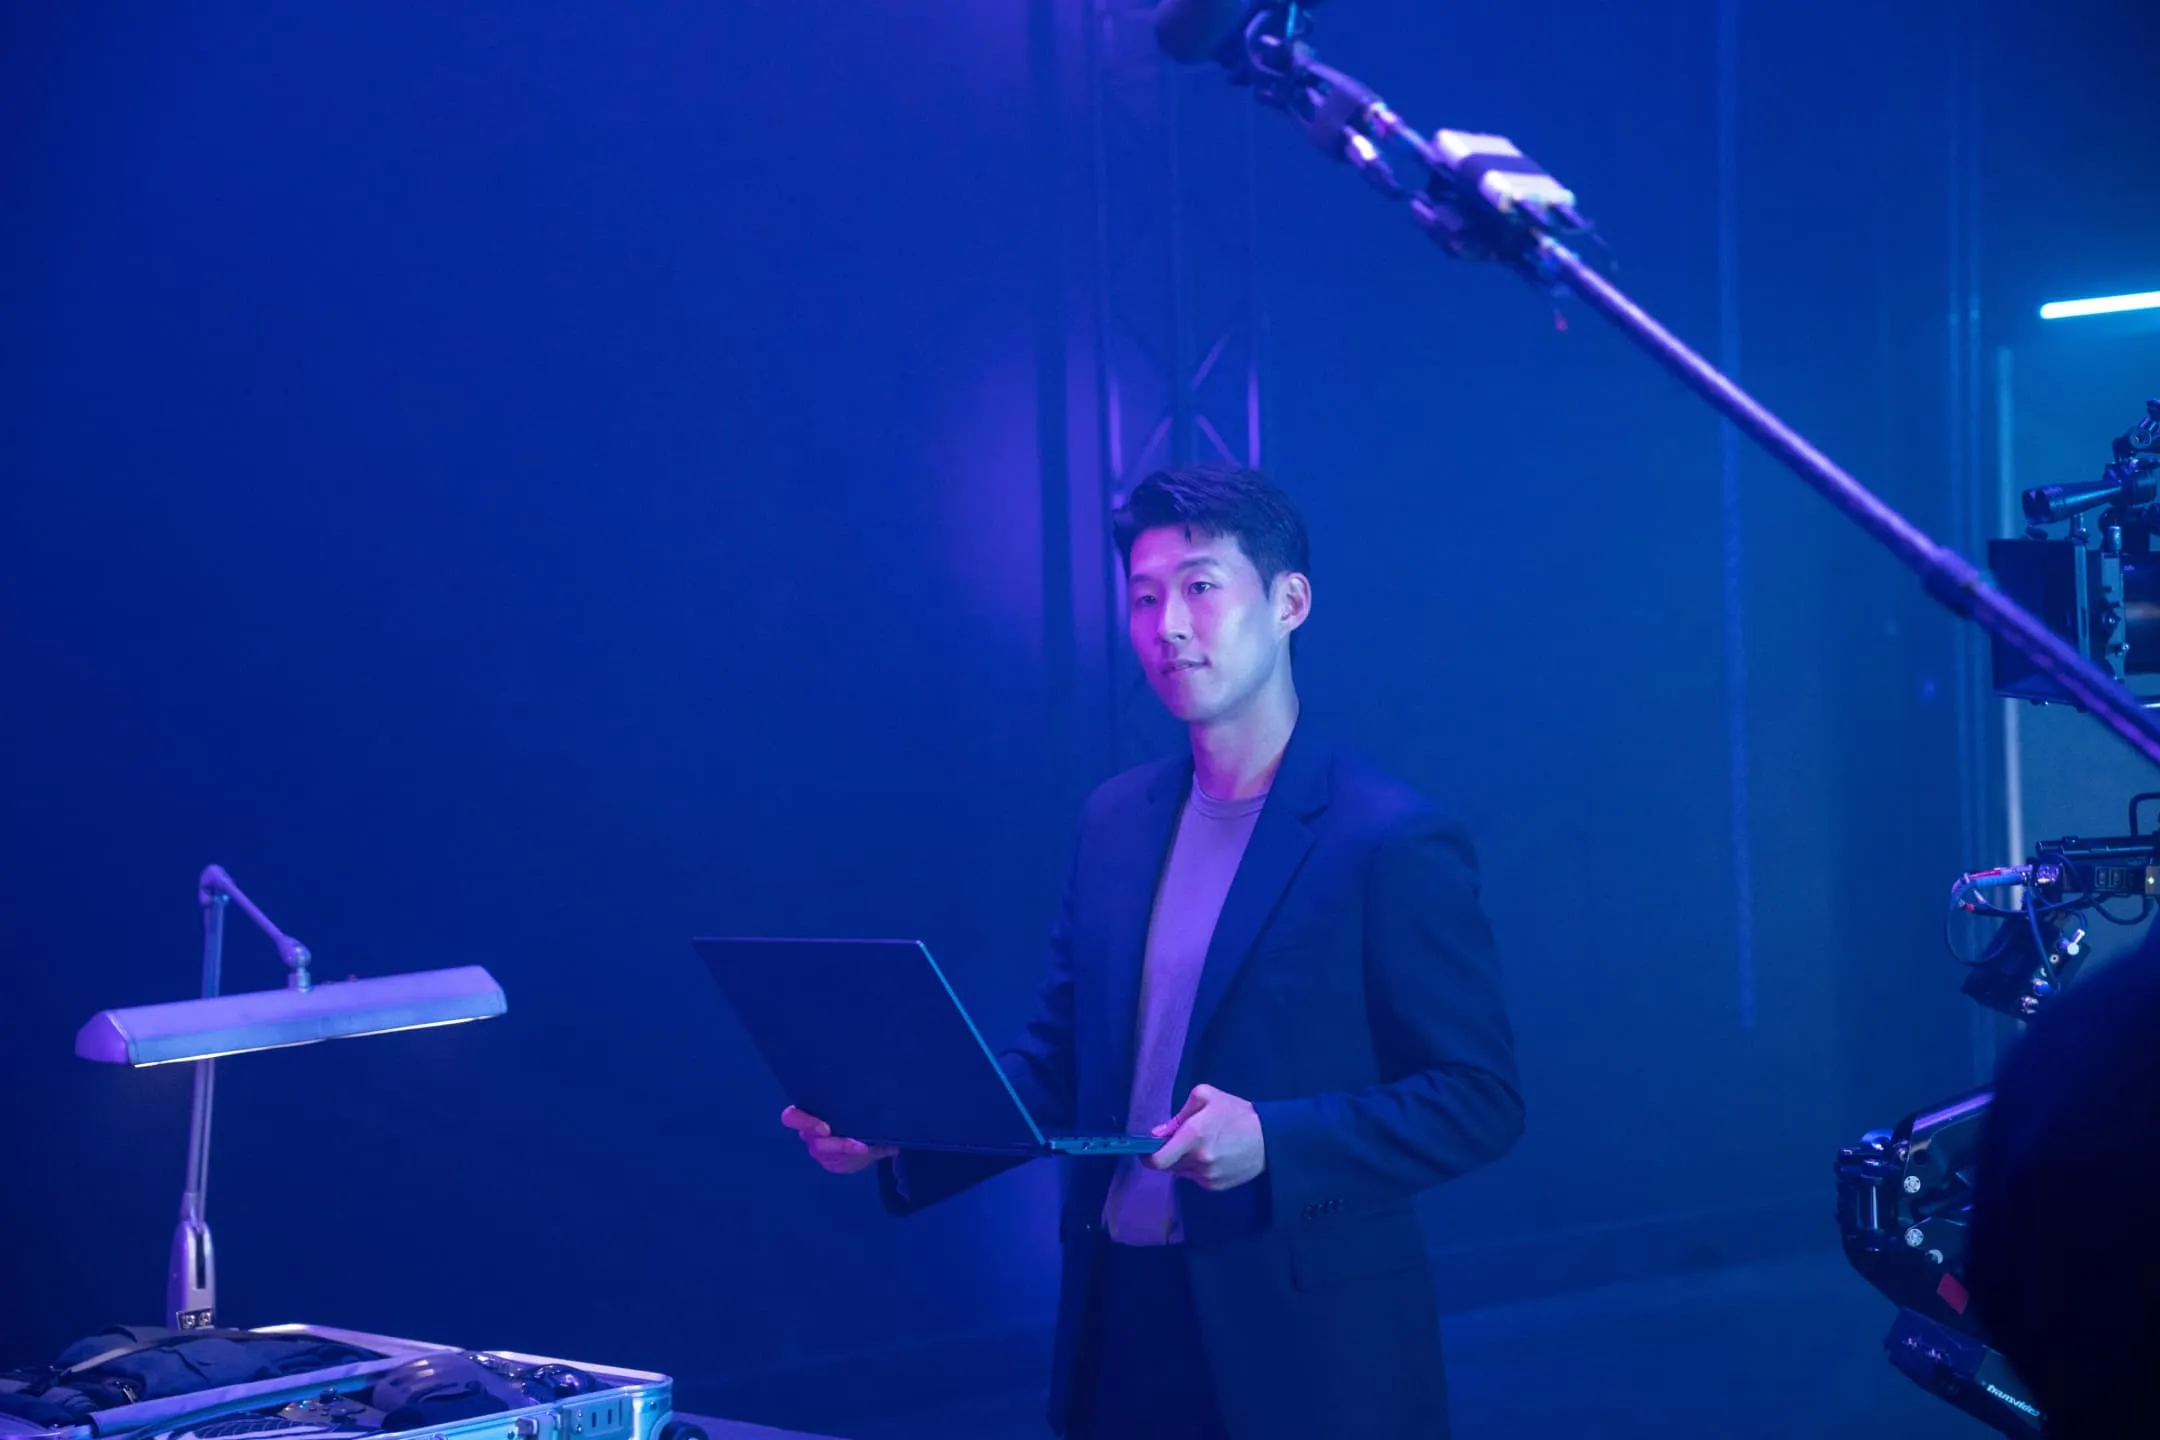 Son Heung-Min on set in front of a blue background, holding a ROG Flow X16 laptop with a camera and boom microphone next to him.